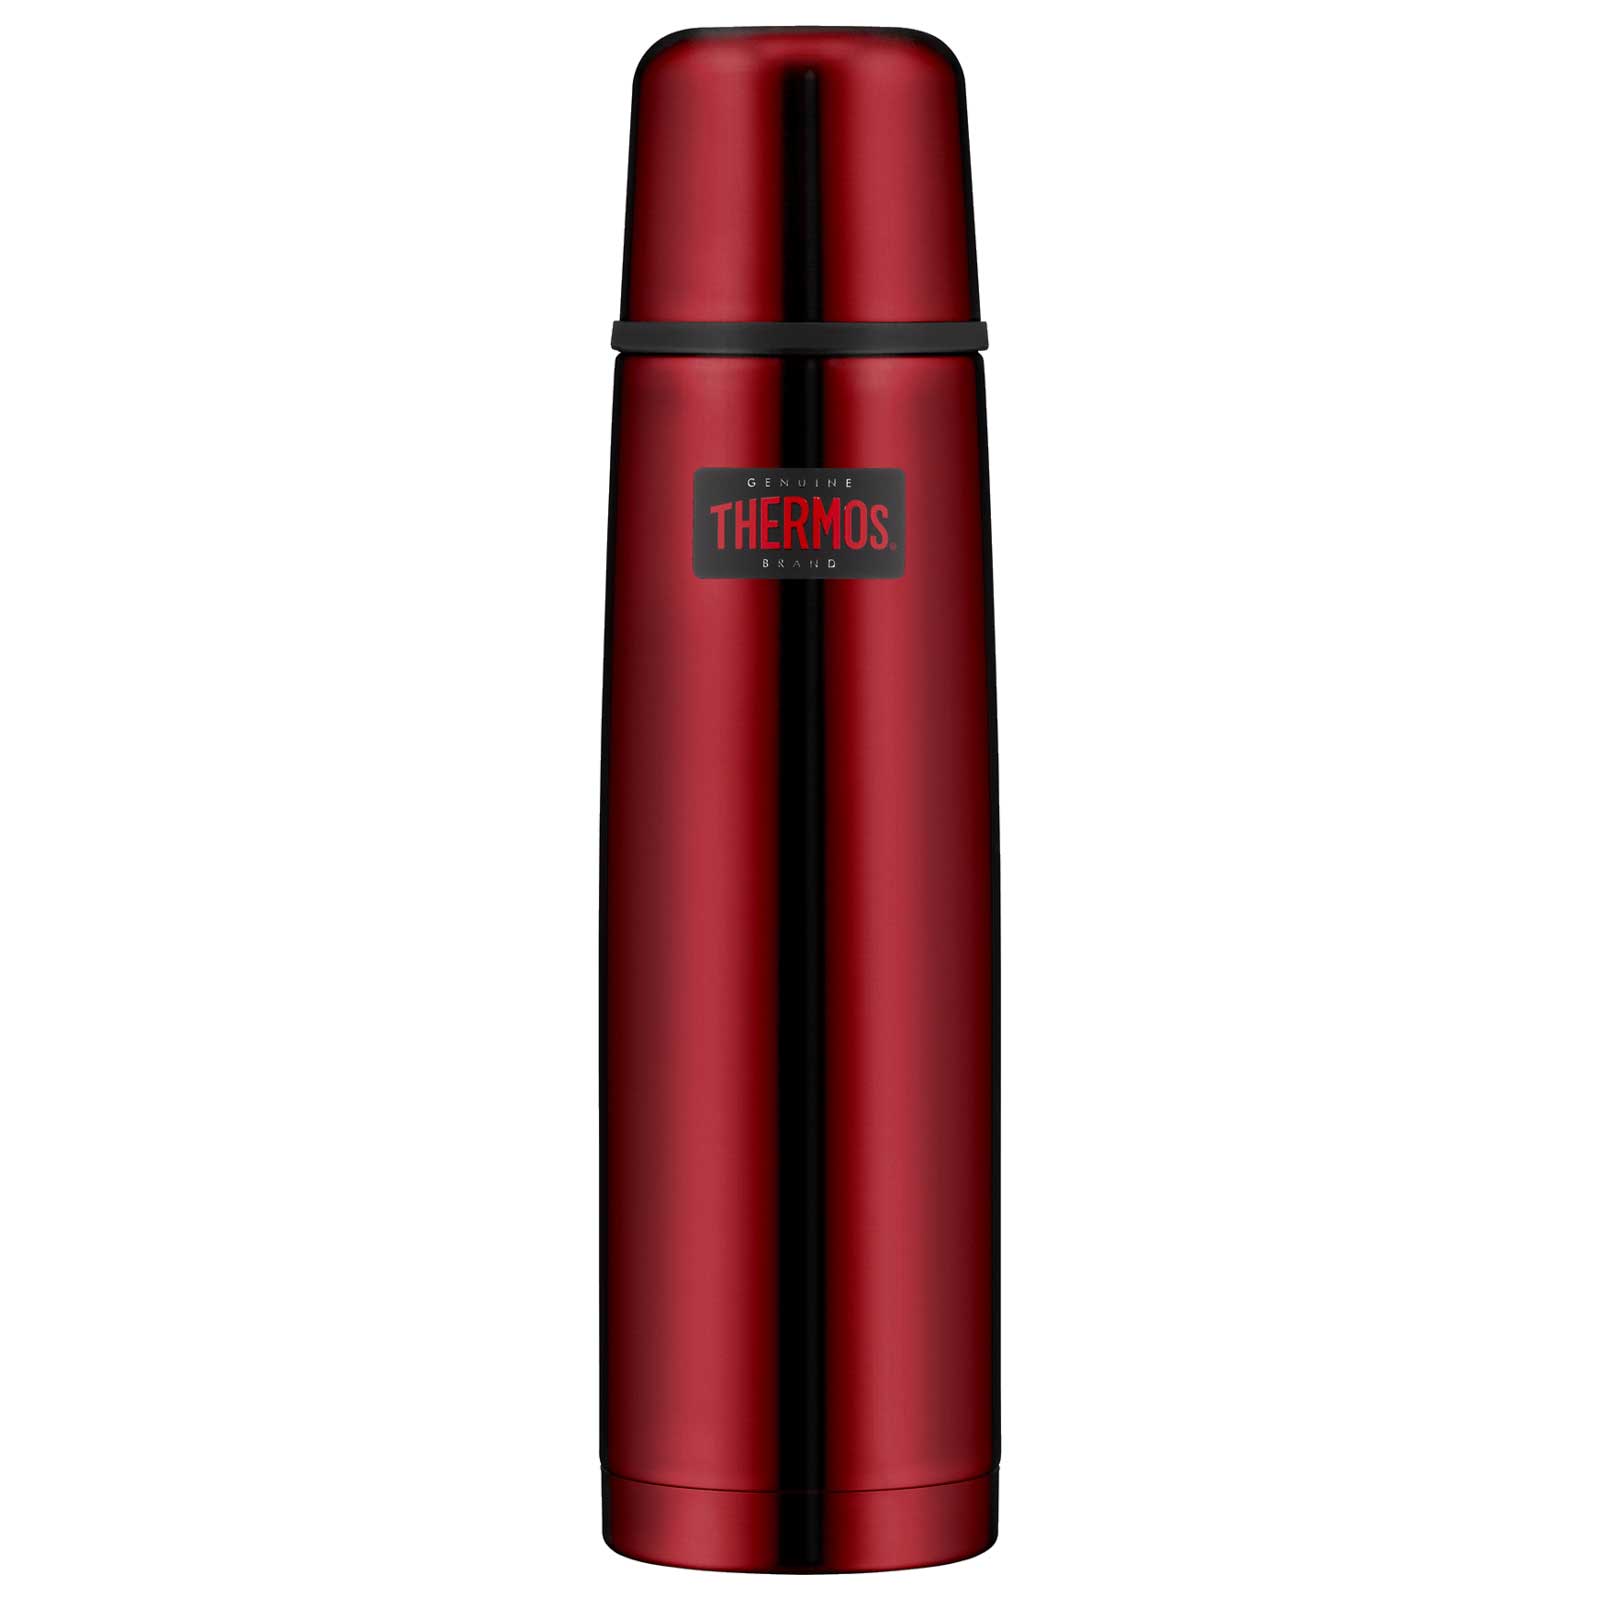 Bild von THERMOS® Light & Compact 1.0L Thermosflasche - cranberry red polished